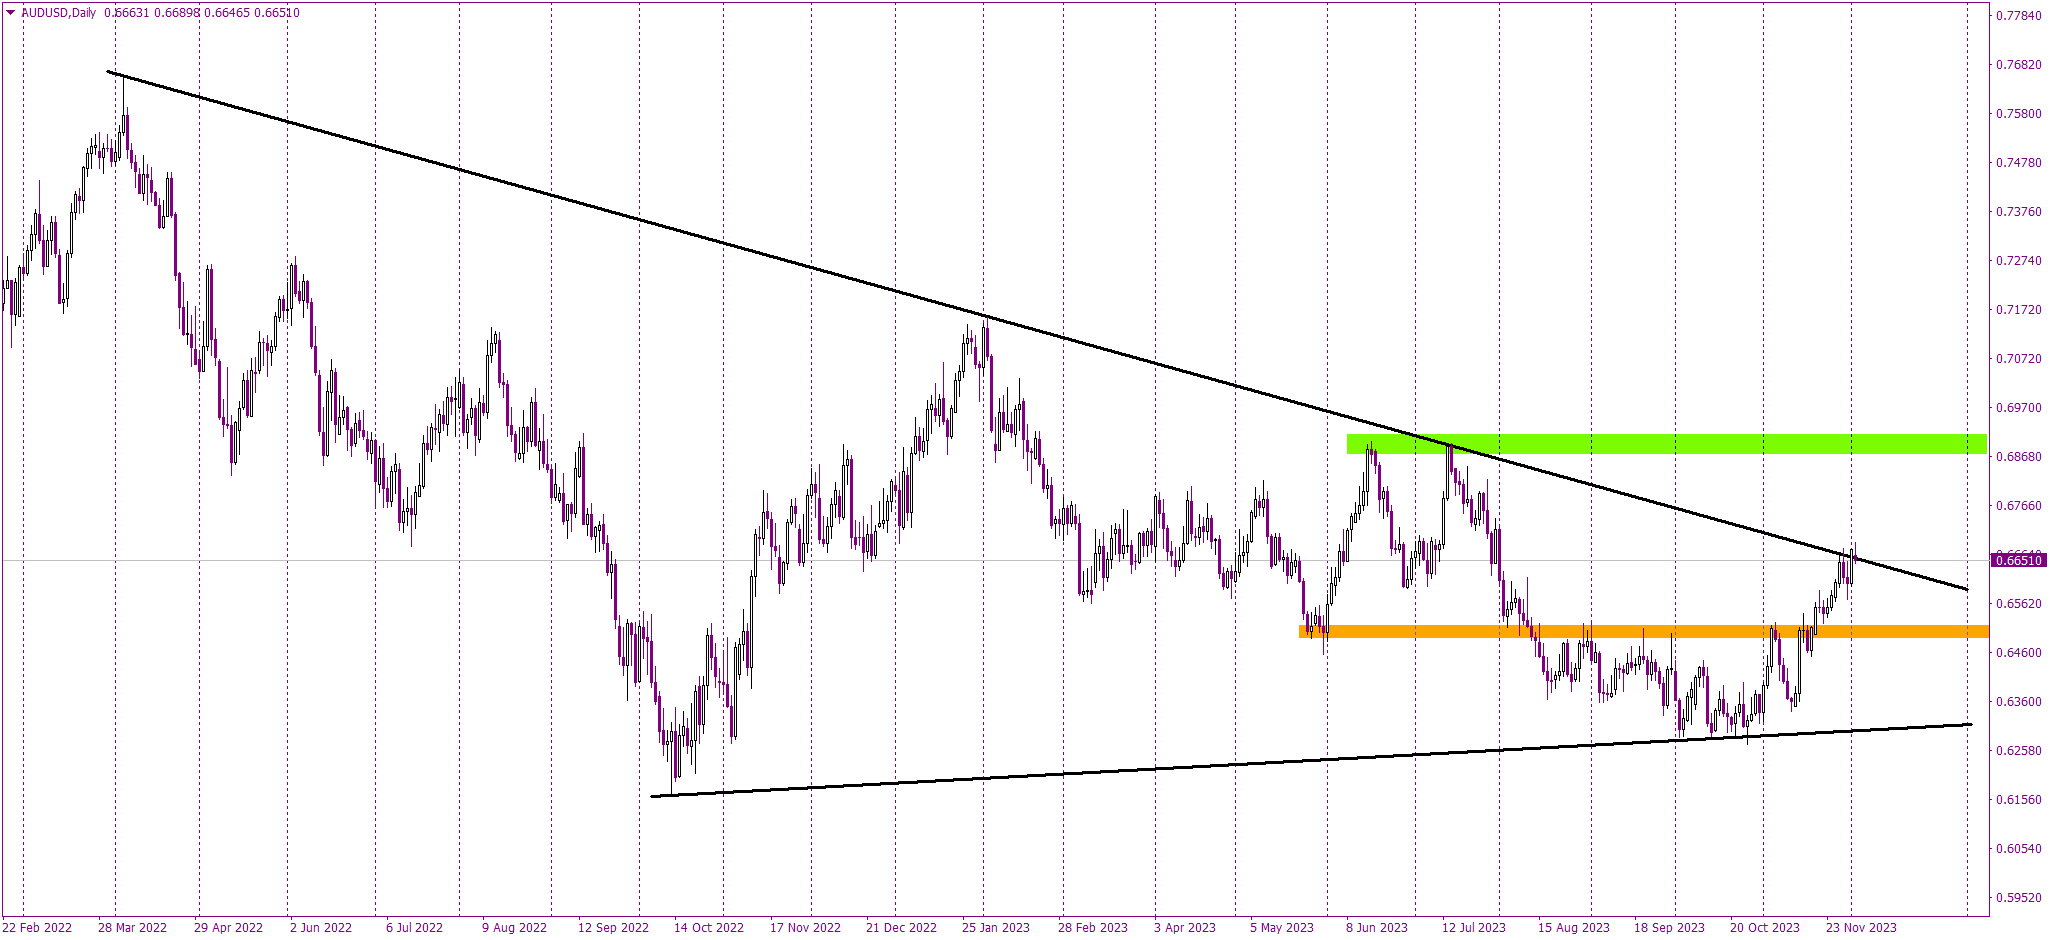 Key Resistance Test: A Turning Point for AUD/USD?